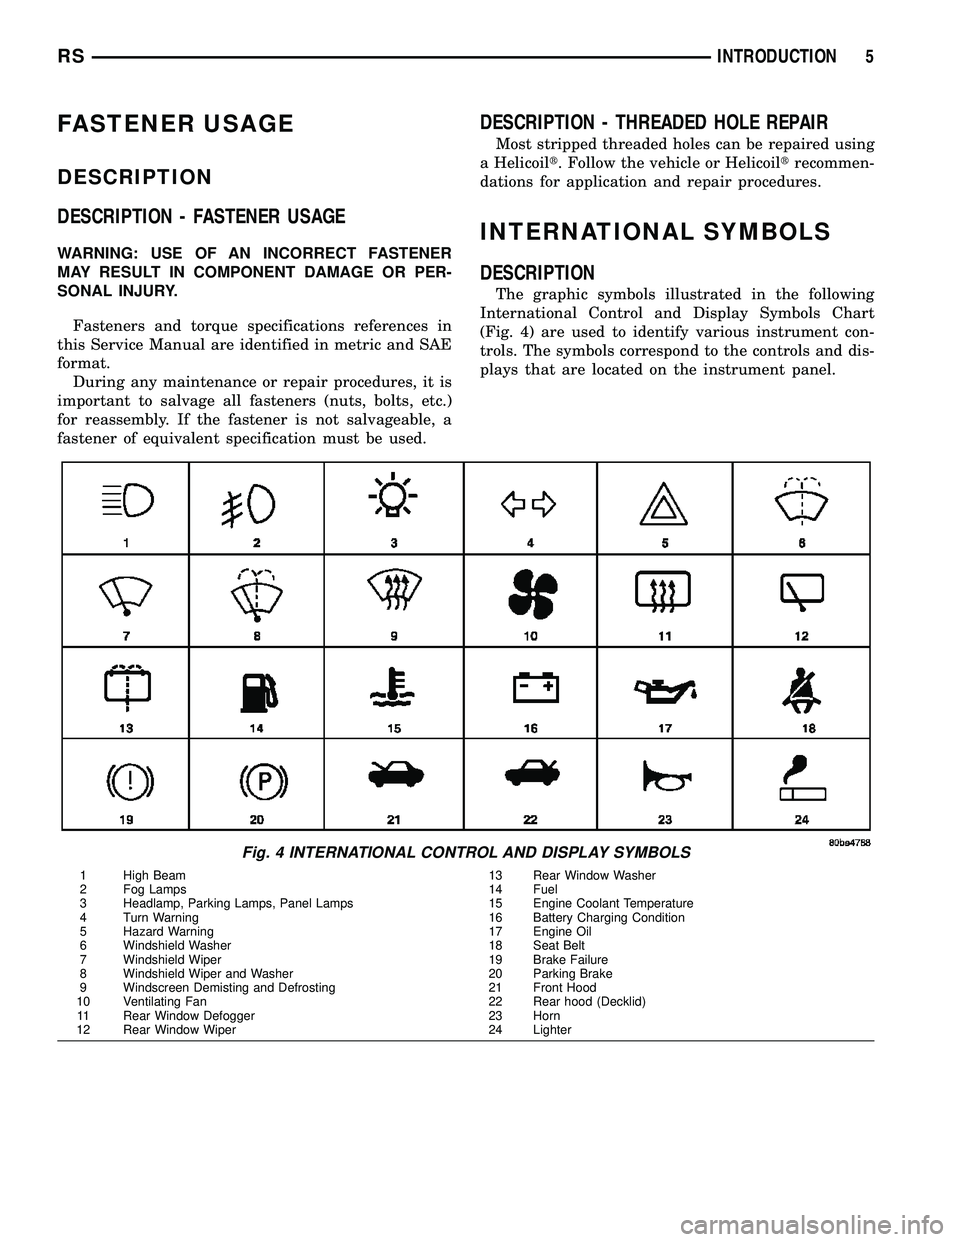 DODGE TOWN AND COUNTRY 2004  Service Manual FASTENER USAGE
DESCRIPTION
DESCRIPTION - FASTENER USAGE
WARNING: USE OF AN INCORRECT FASTENER
MAY RESULT IN COMPONENT DAMAGE OR PER-
SONAL INJURY.
Fasteners and torque specifications references in
thi